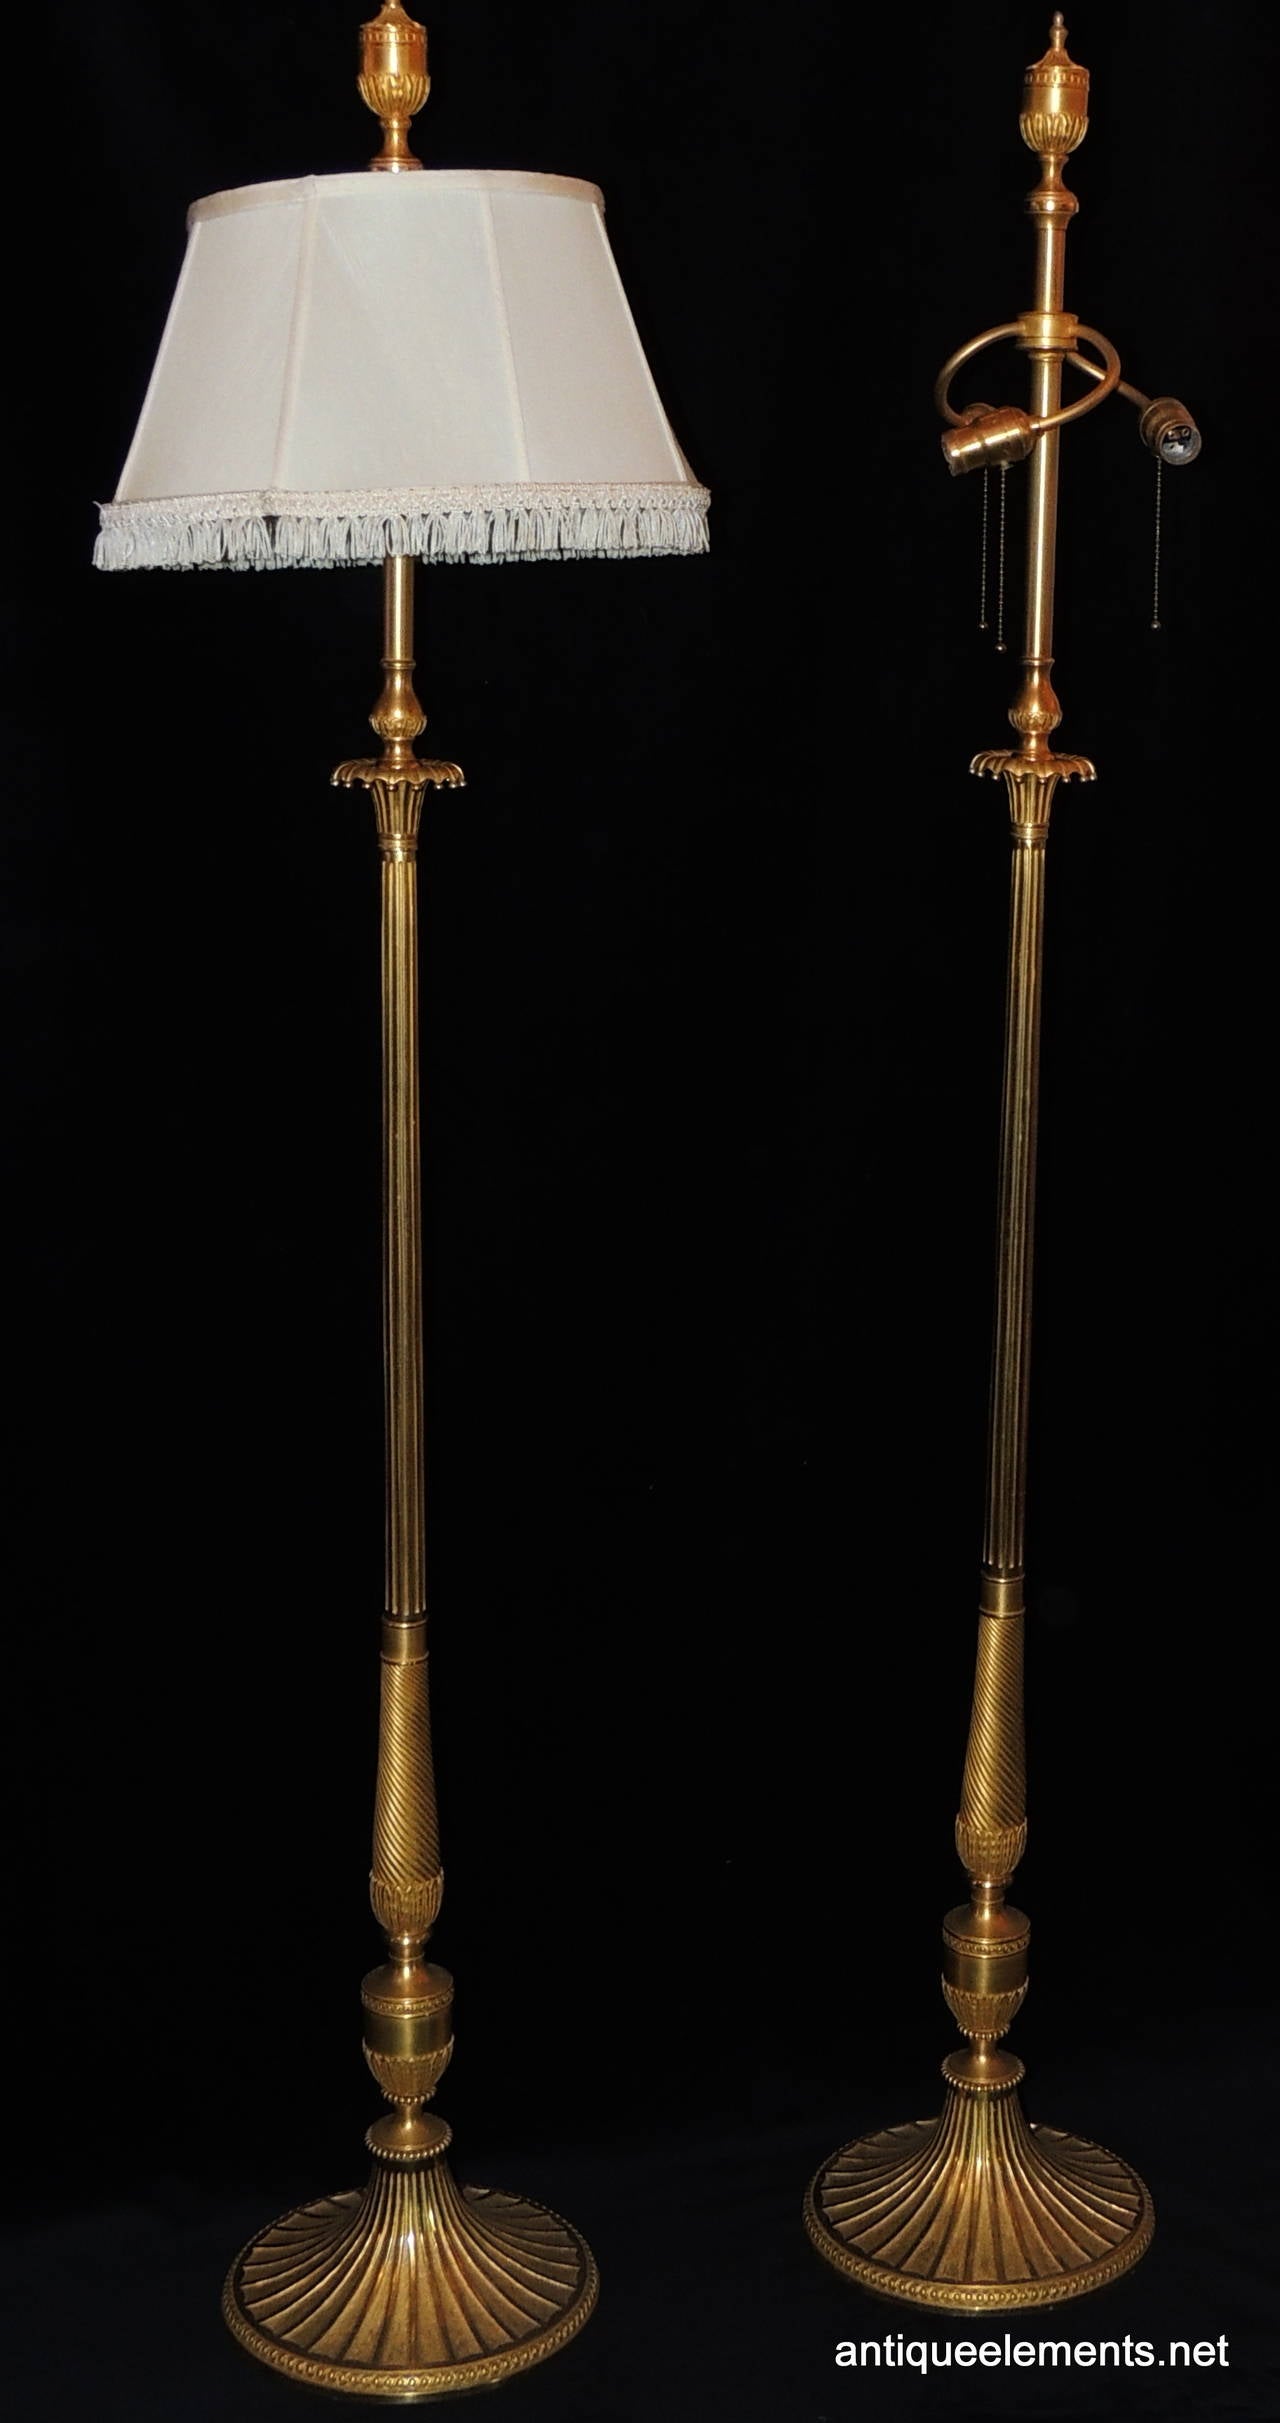 E.F. Caldwell designed this elegant pair of solid bronze floor Lamps which are beautifully detailed with architectural l elements throughout. From the beautiful finial, the fluting on the body and the beautiful etching and beaded bronze accents on